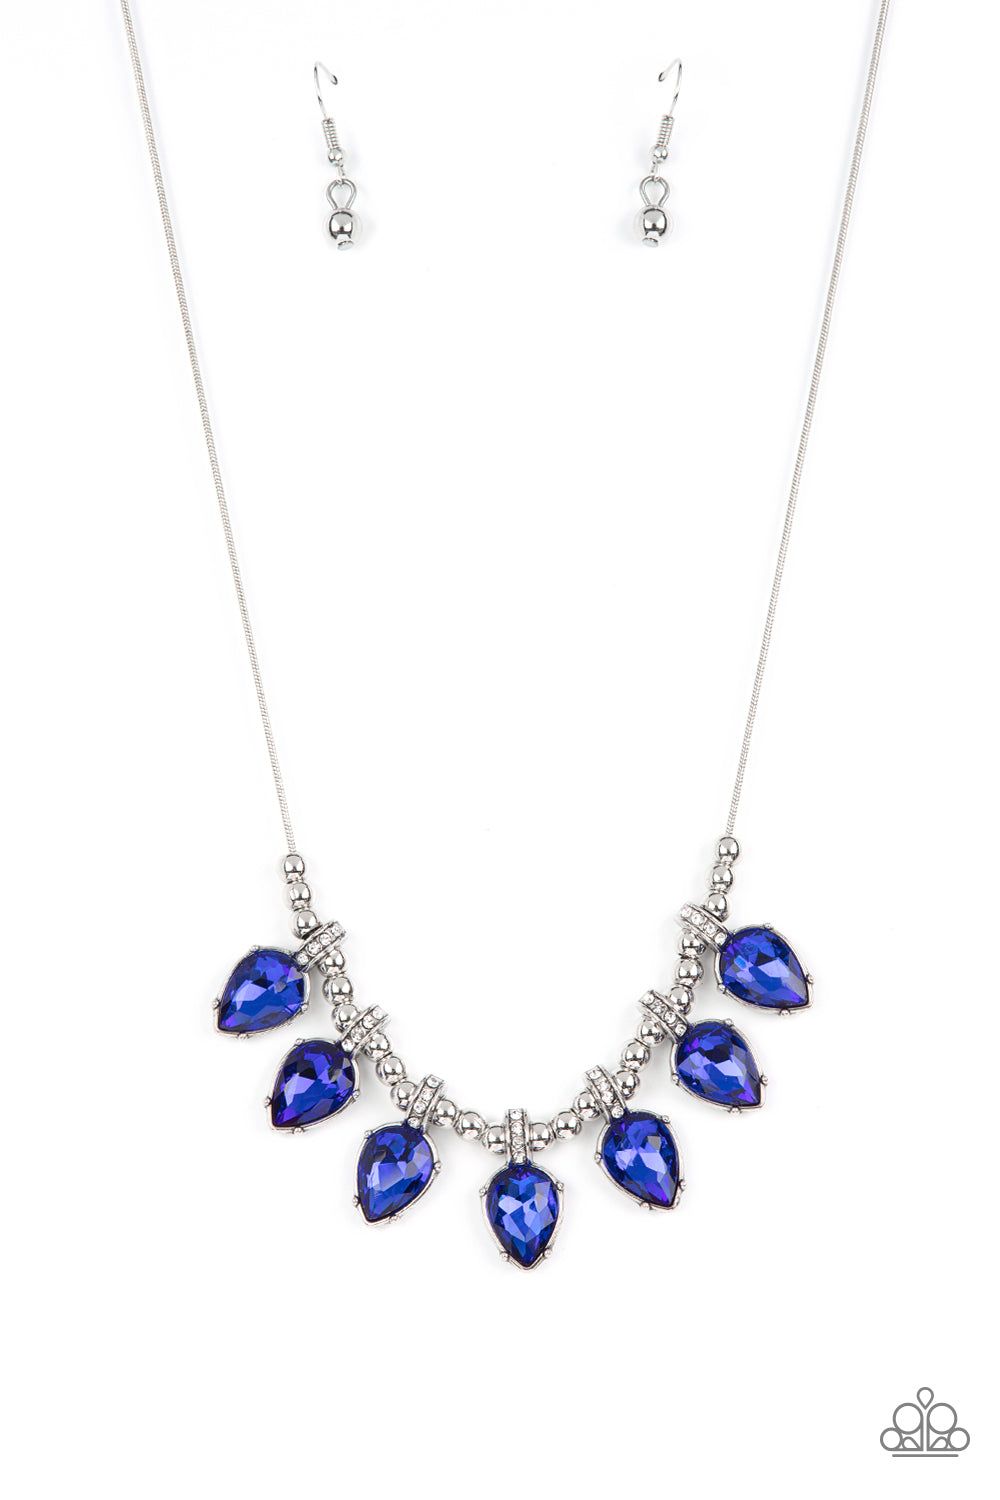 Featuring glittery white rhinestone fittings, an oversized collection of glittery blue teardrop gems are separated by trios of shiny silver beads along a round silver snake chain below the collar for a glamorous fringe. Features an adjustable clasp closure..